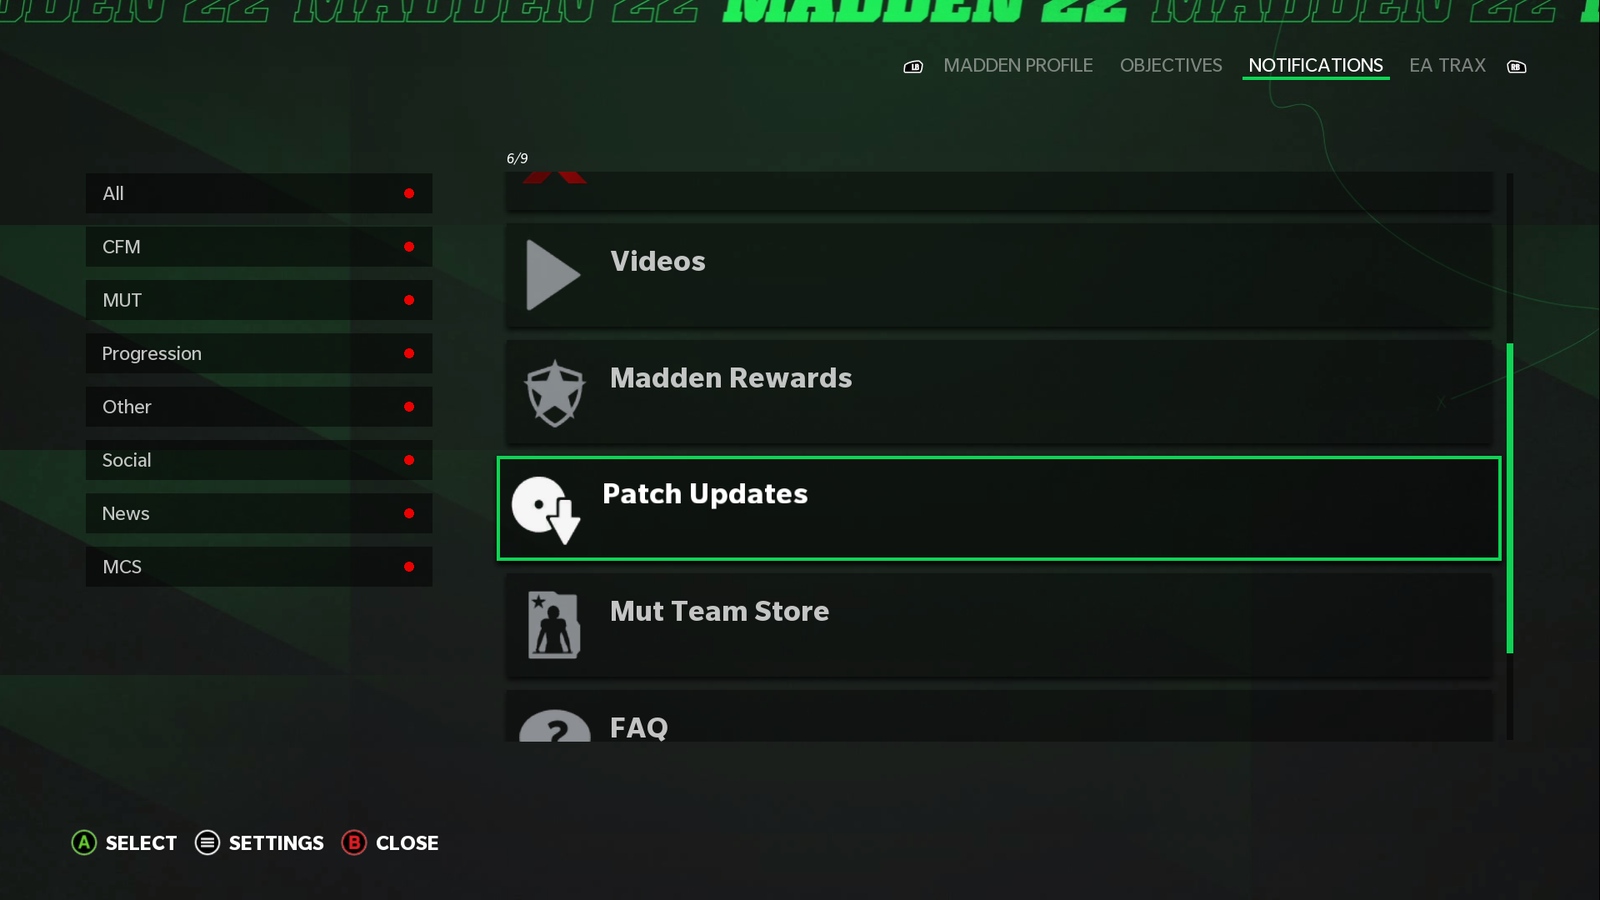 The patch updates tab in Madden 22